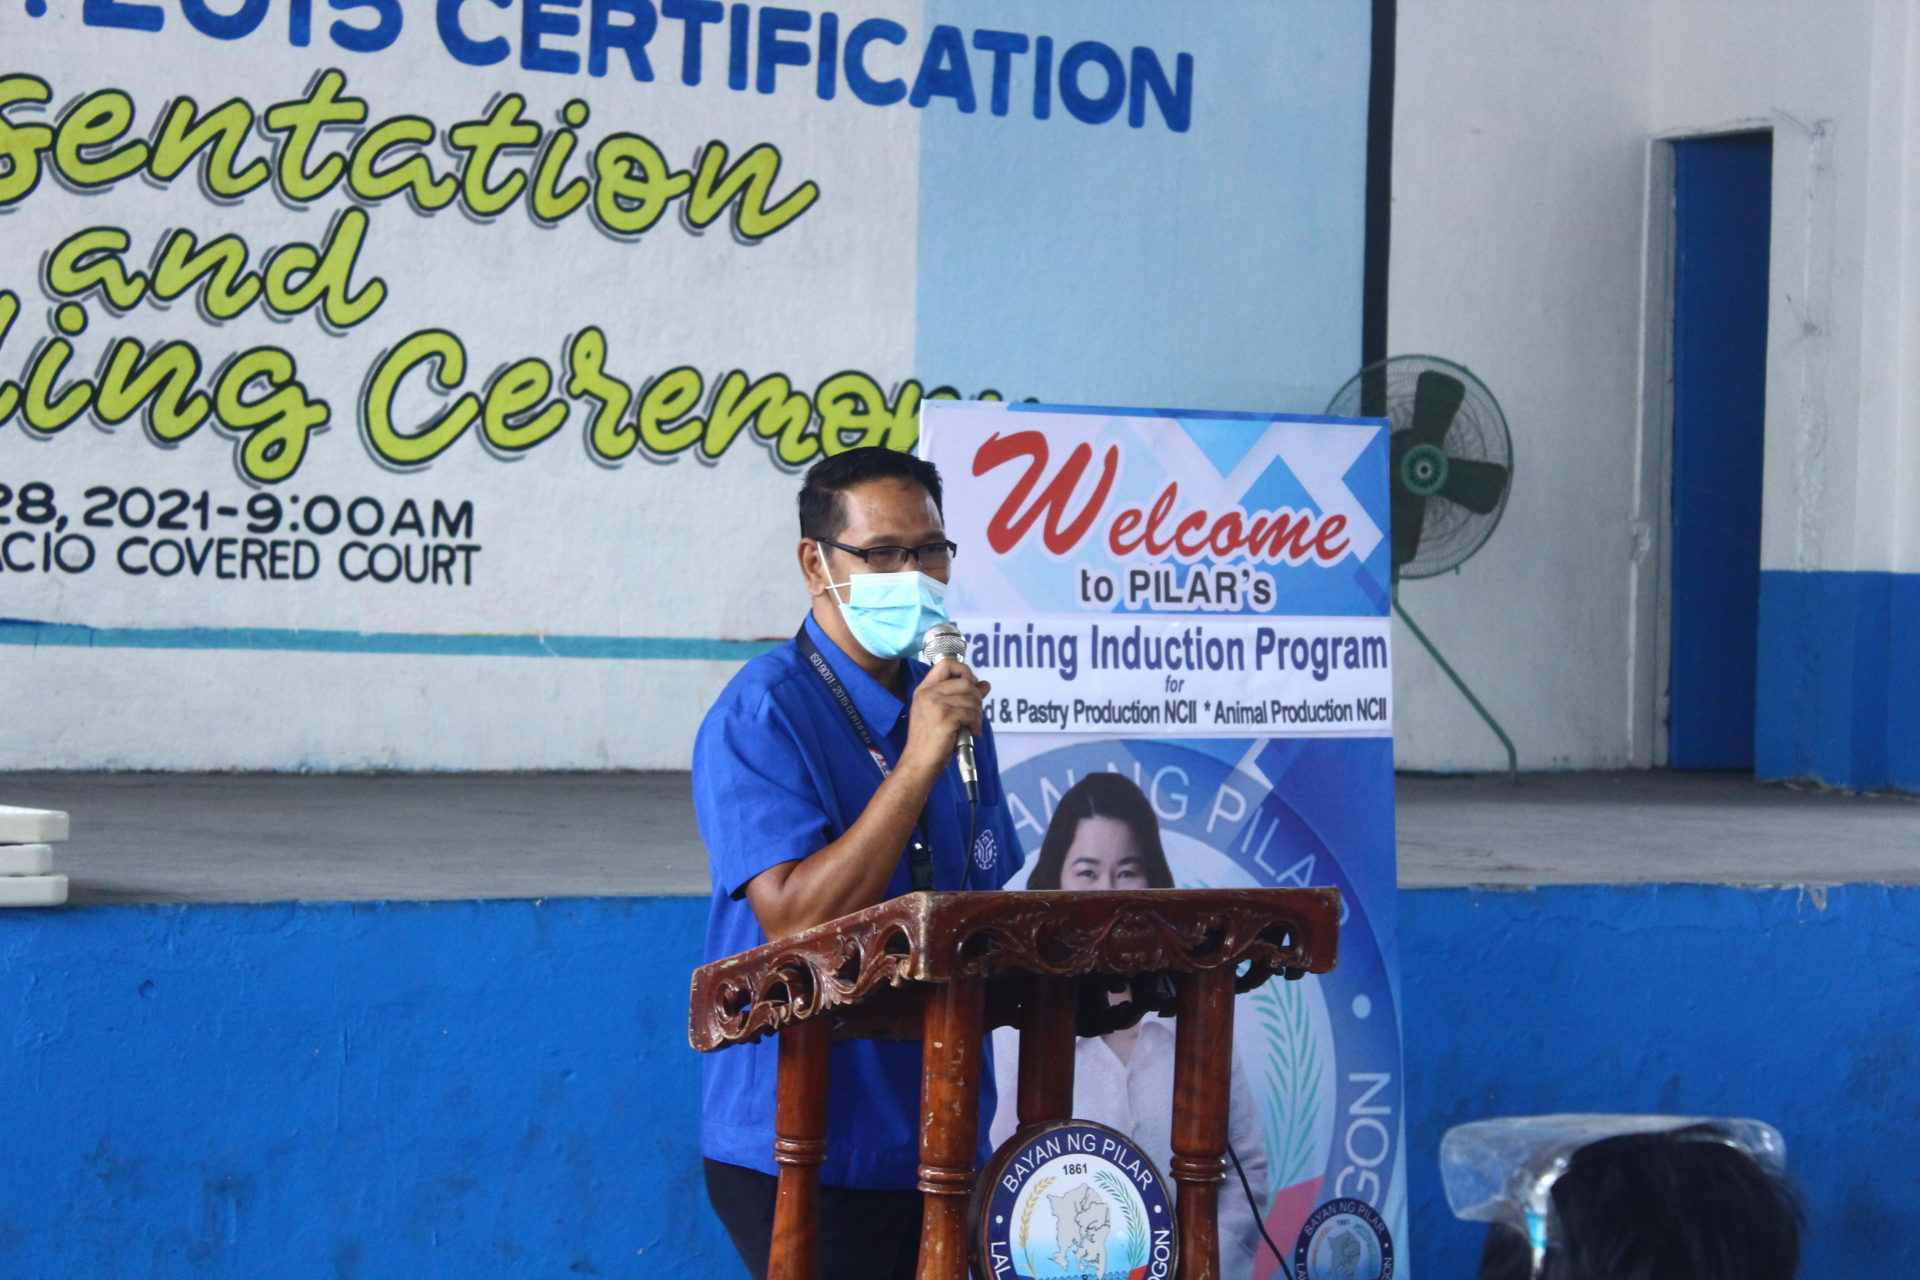 TESDA Training in PILAR this year: A jumpstart held today